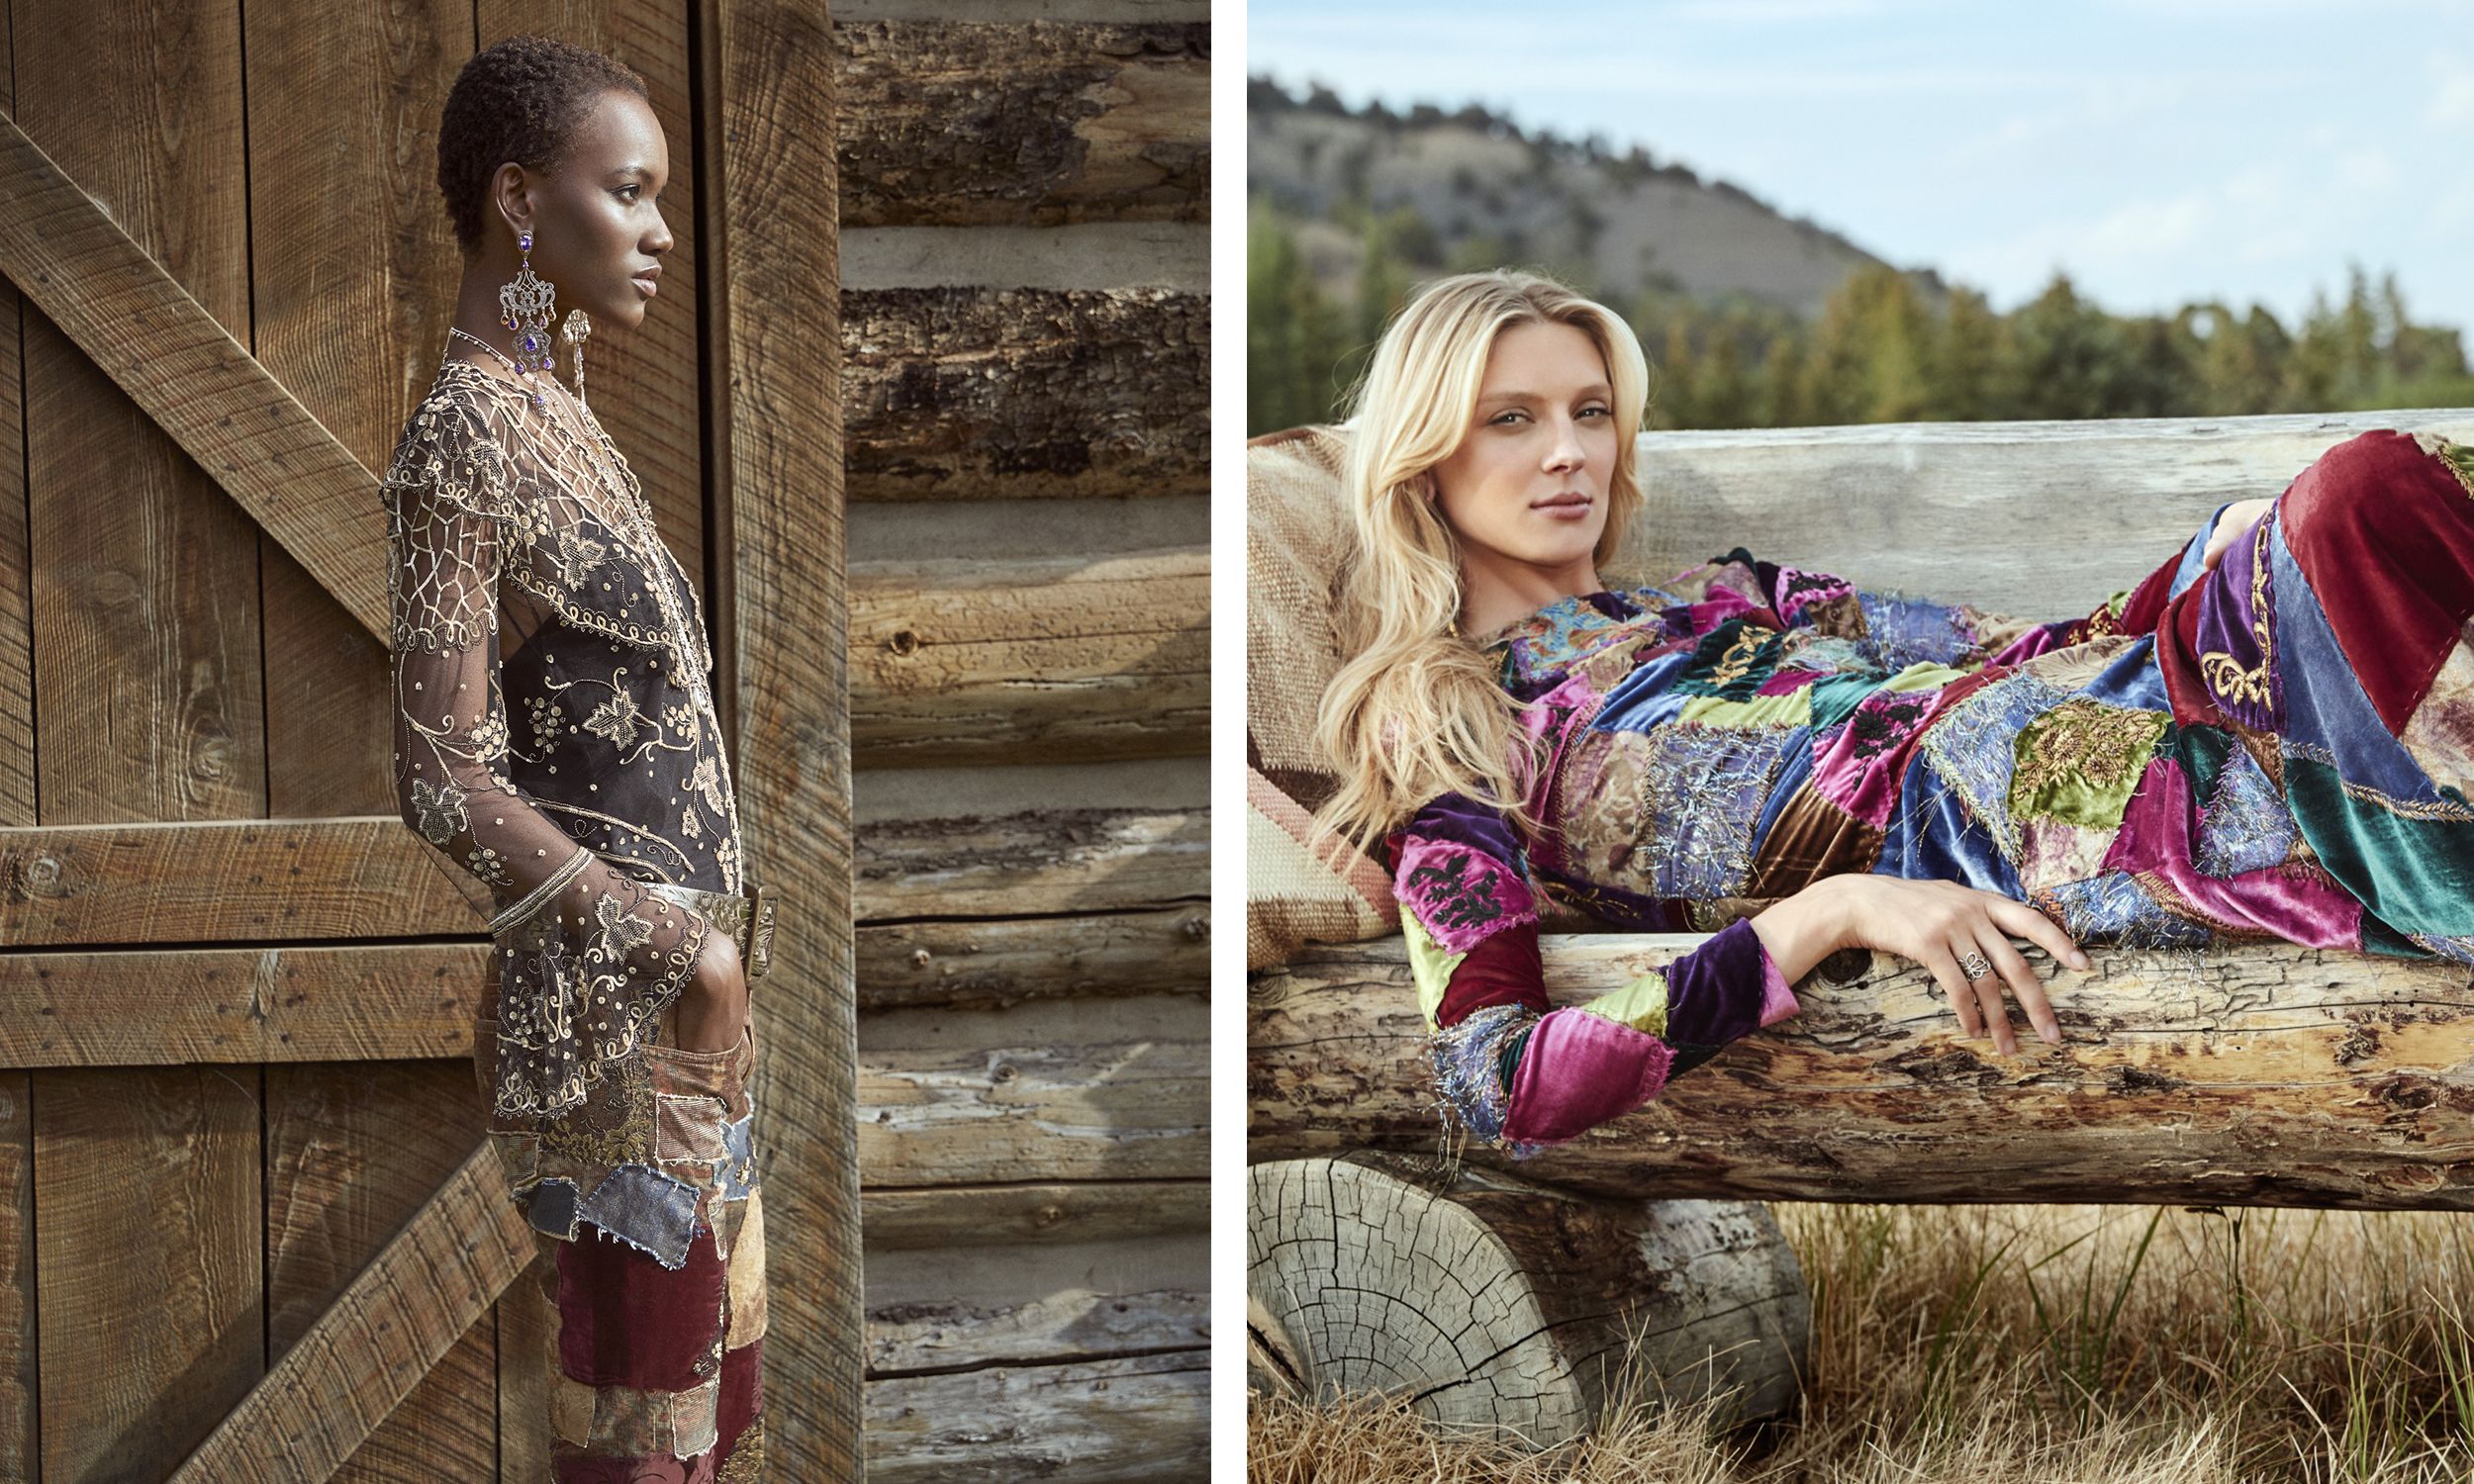 A Celebration of Ralph Lauren - Visiting the Iconic Designer's Colorado  Ranch